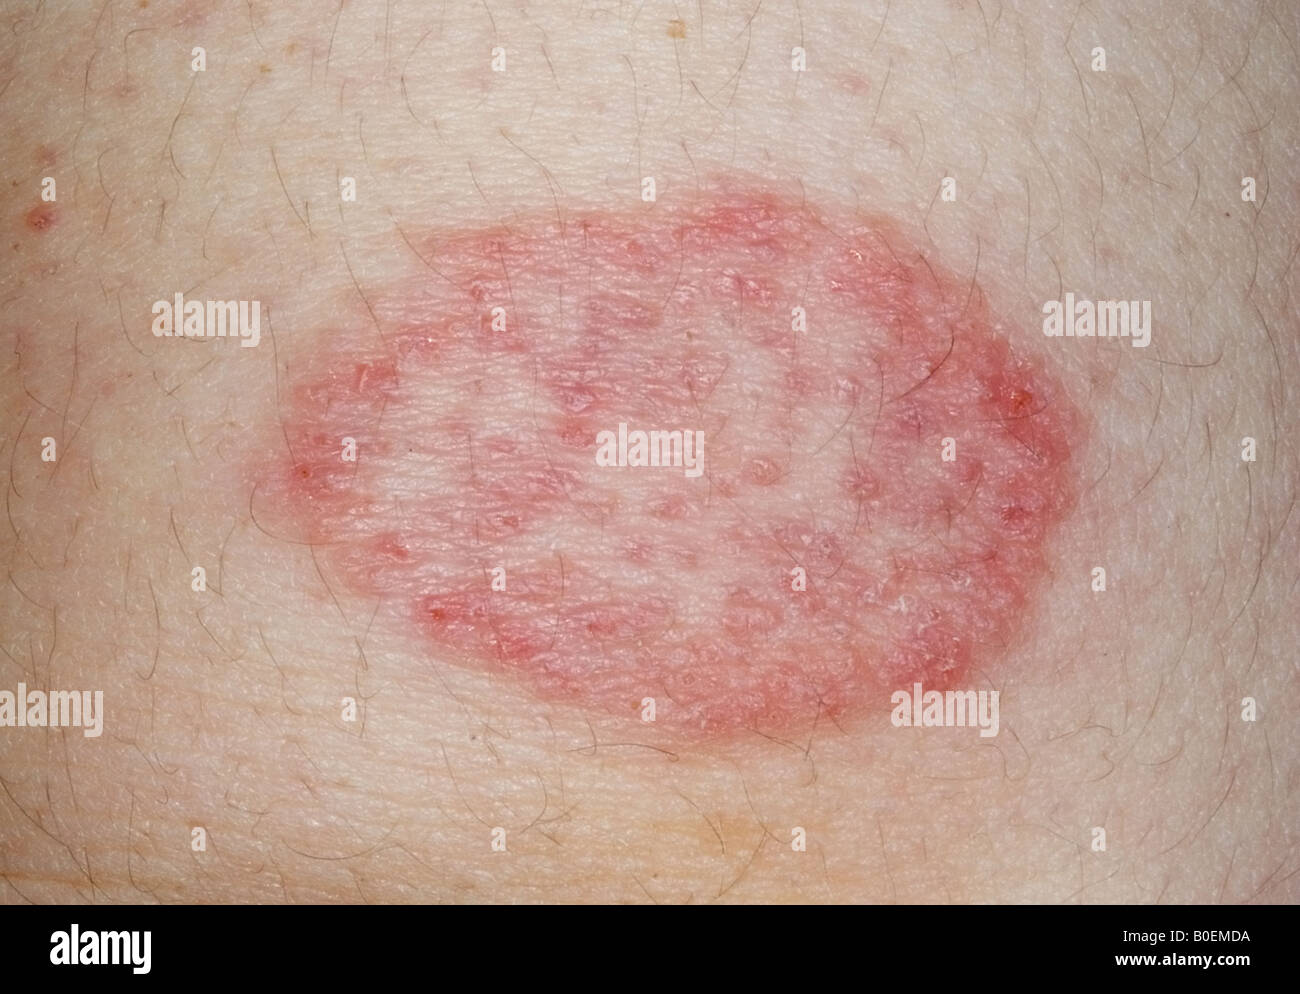 ringworm fungus infection of the skin Stock Photo